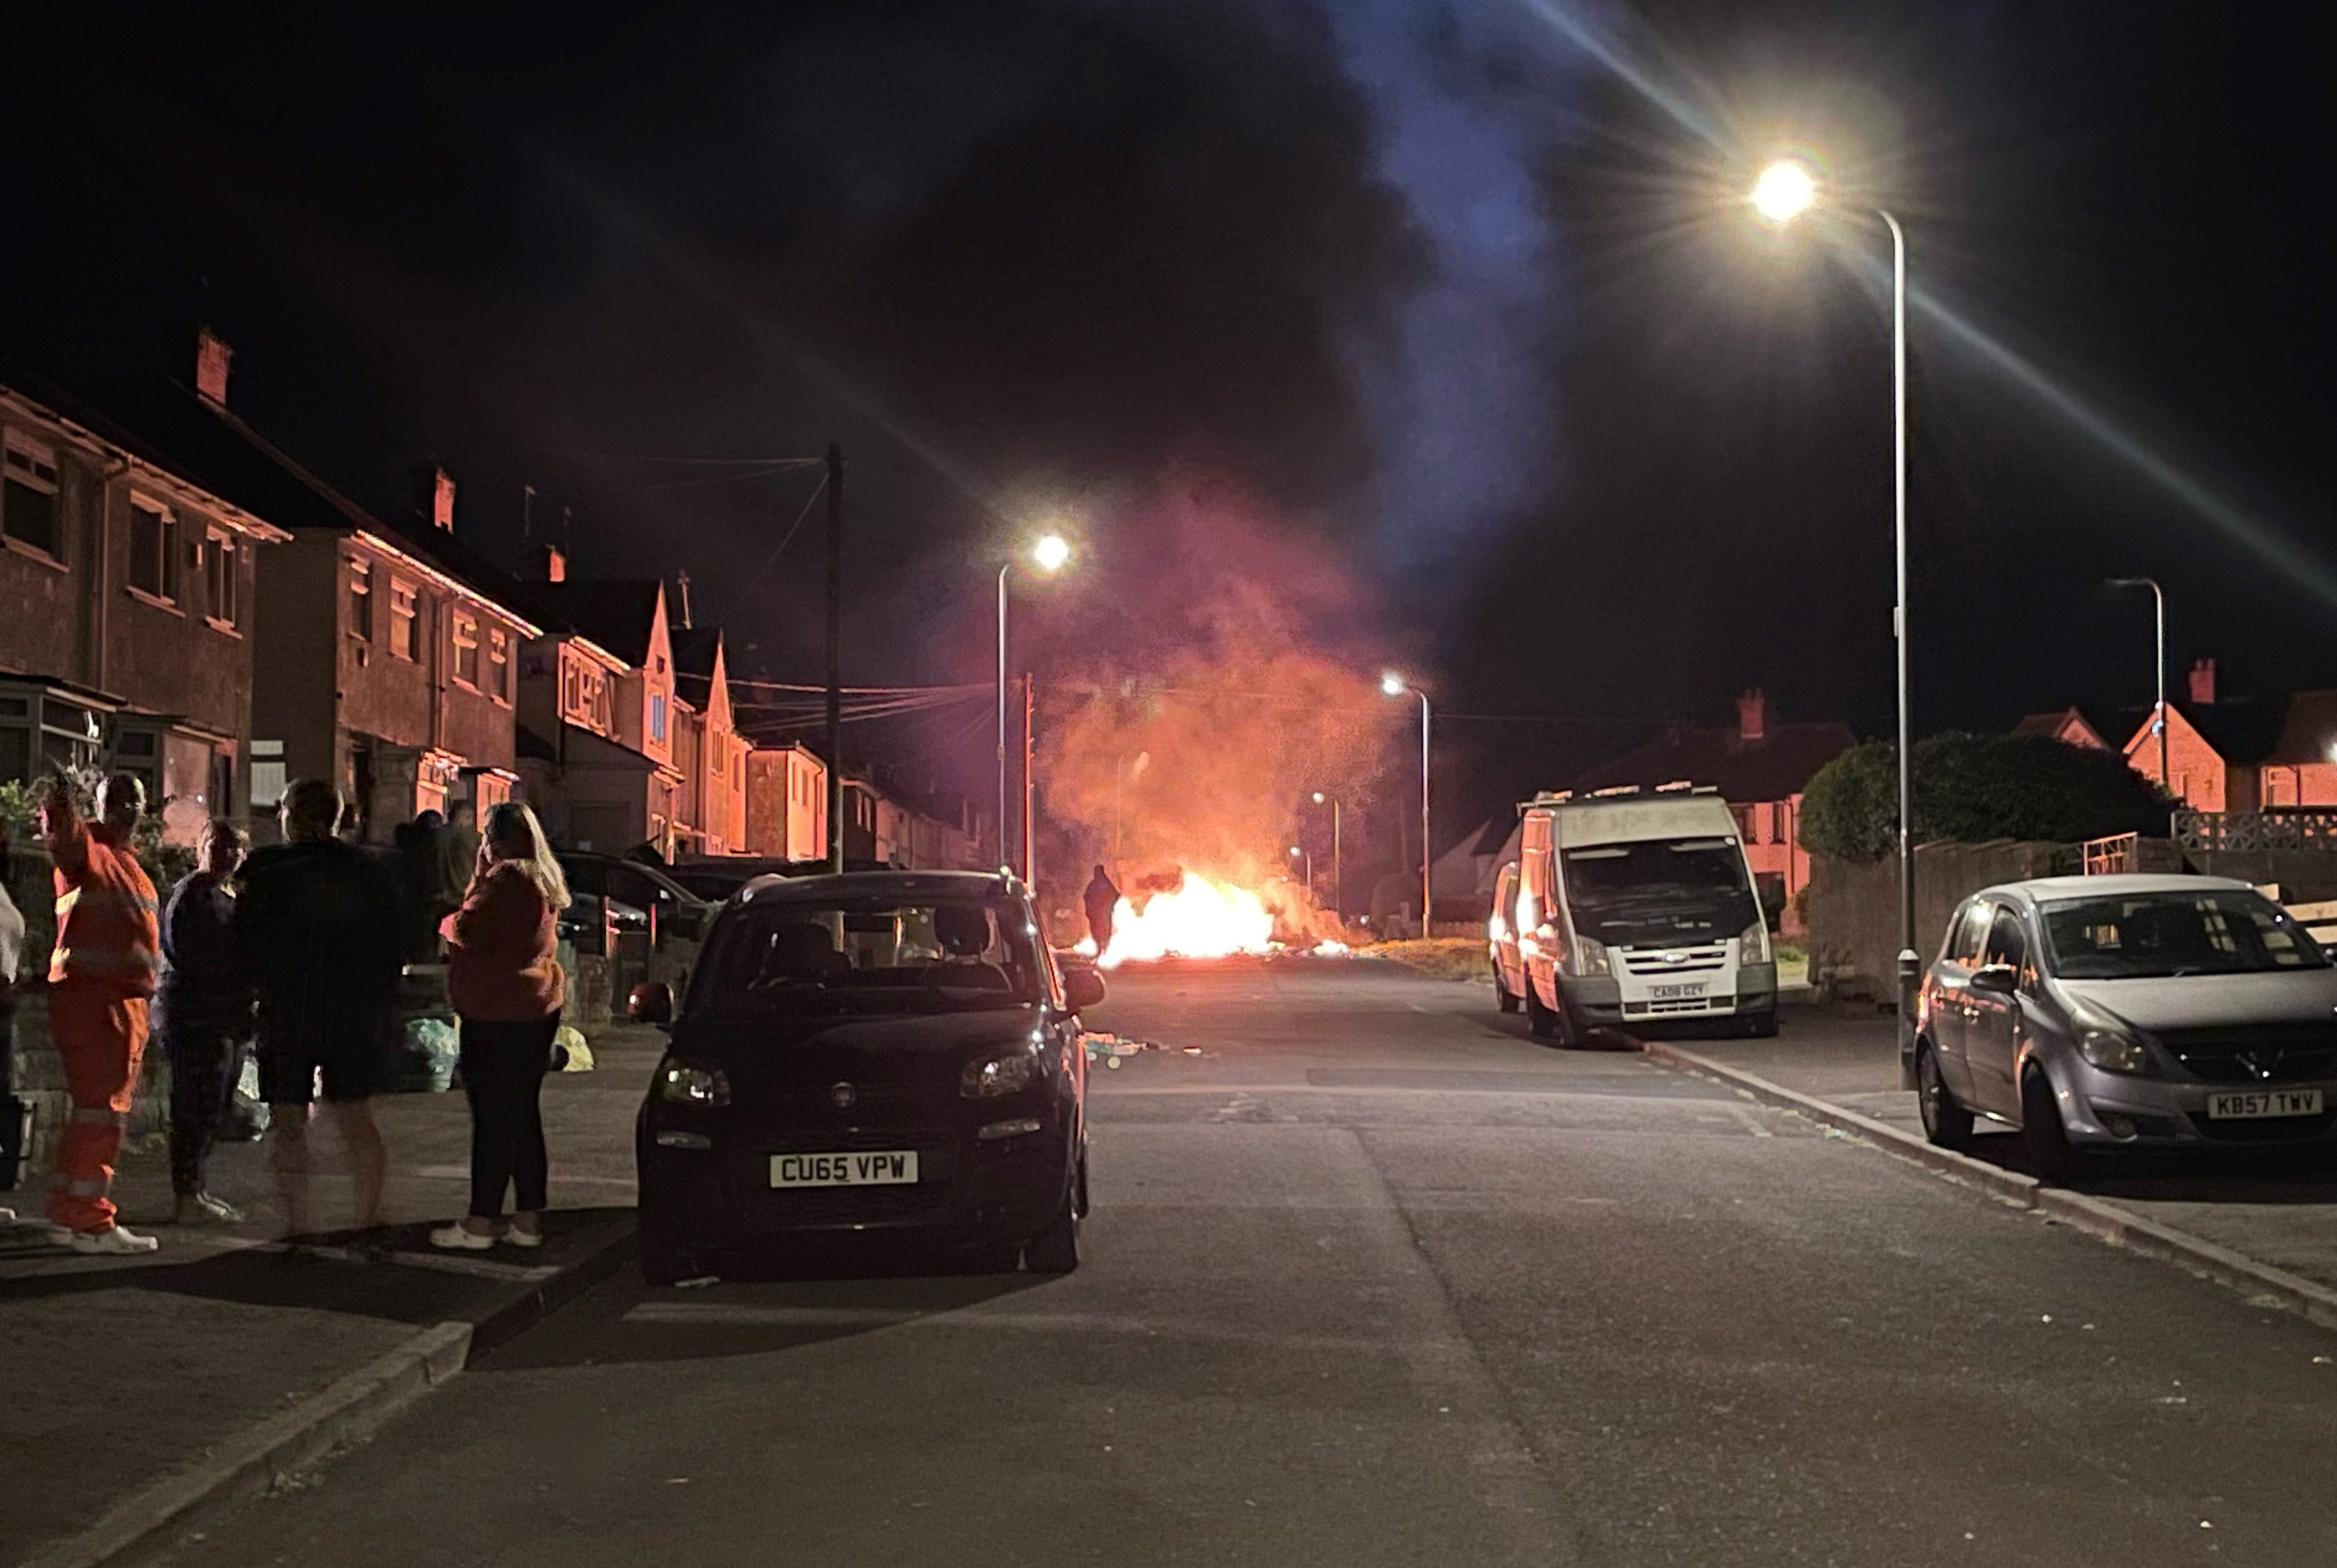 A number of vehicles in the area were torched by rioters